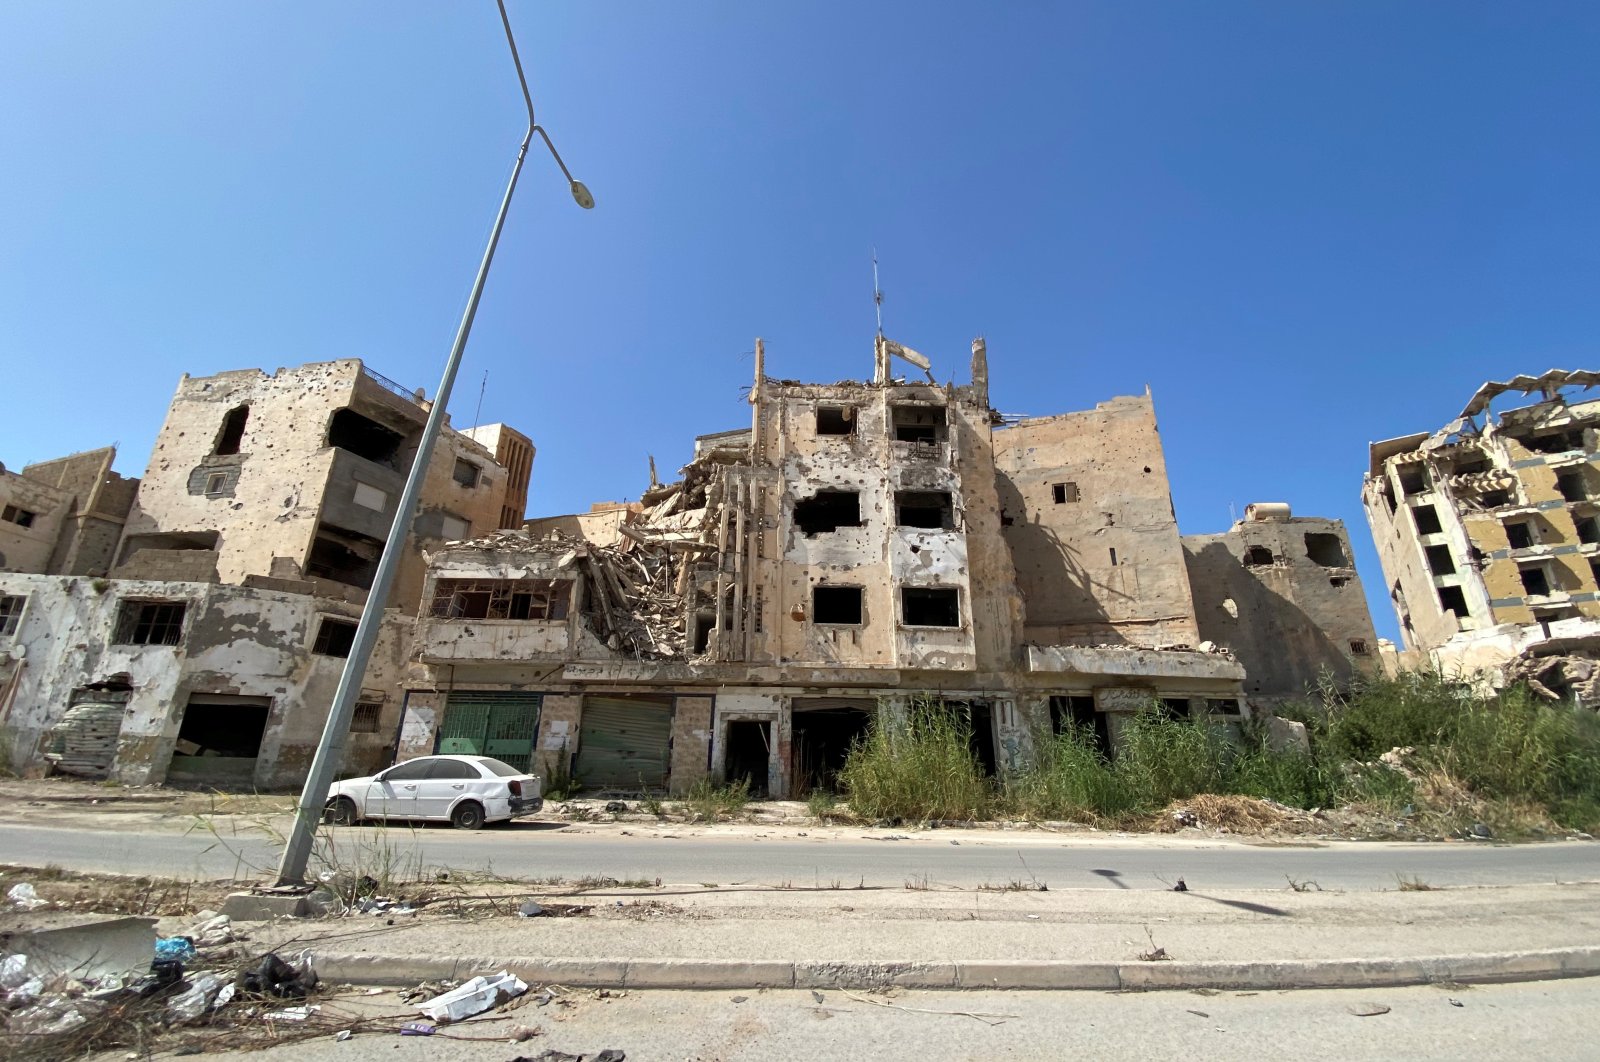 Buildings destroyed during past fighting with Daesh terrorists are seen in Benghazi, Libya, Sept. 30, 2020. (Reuters Photo)